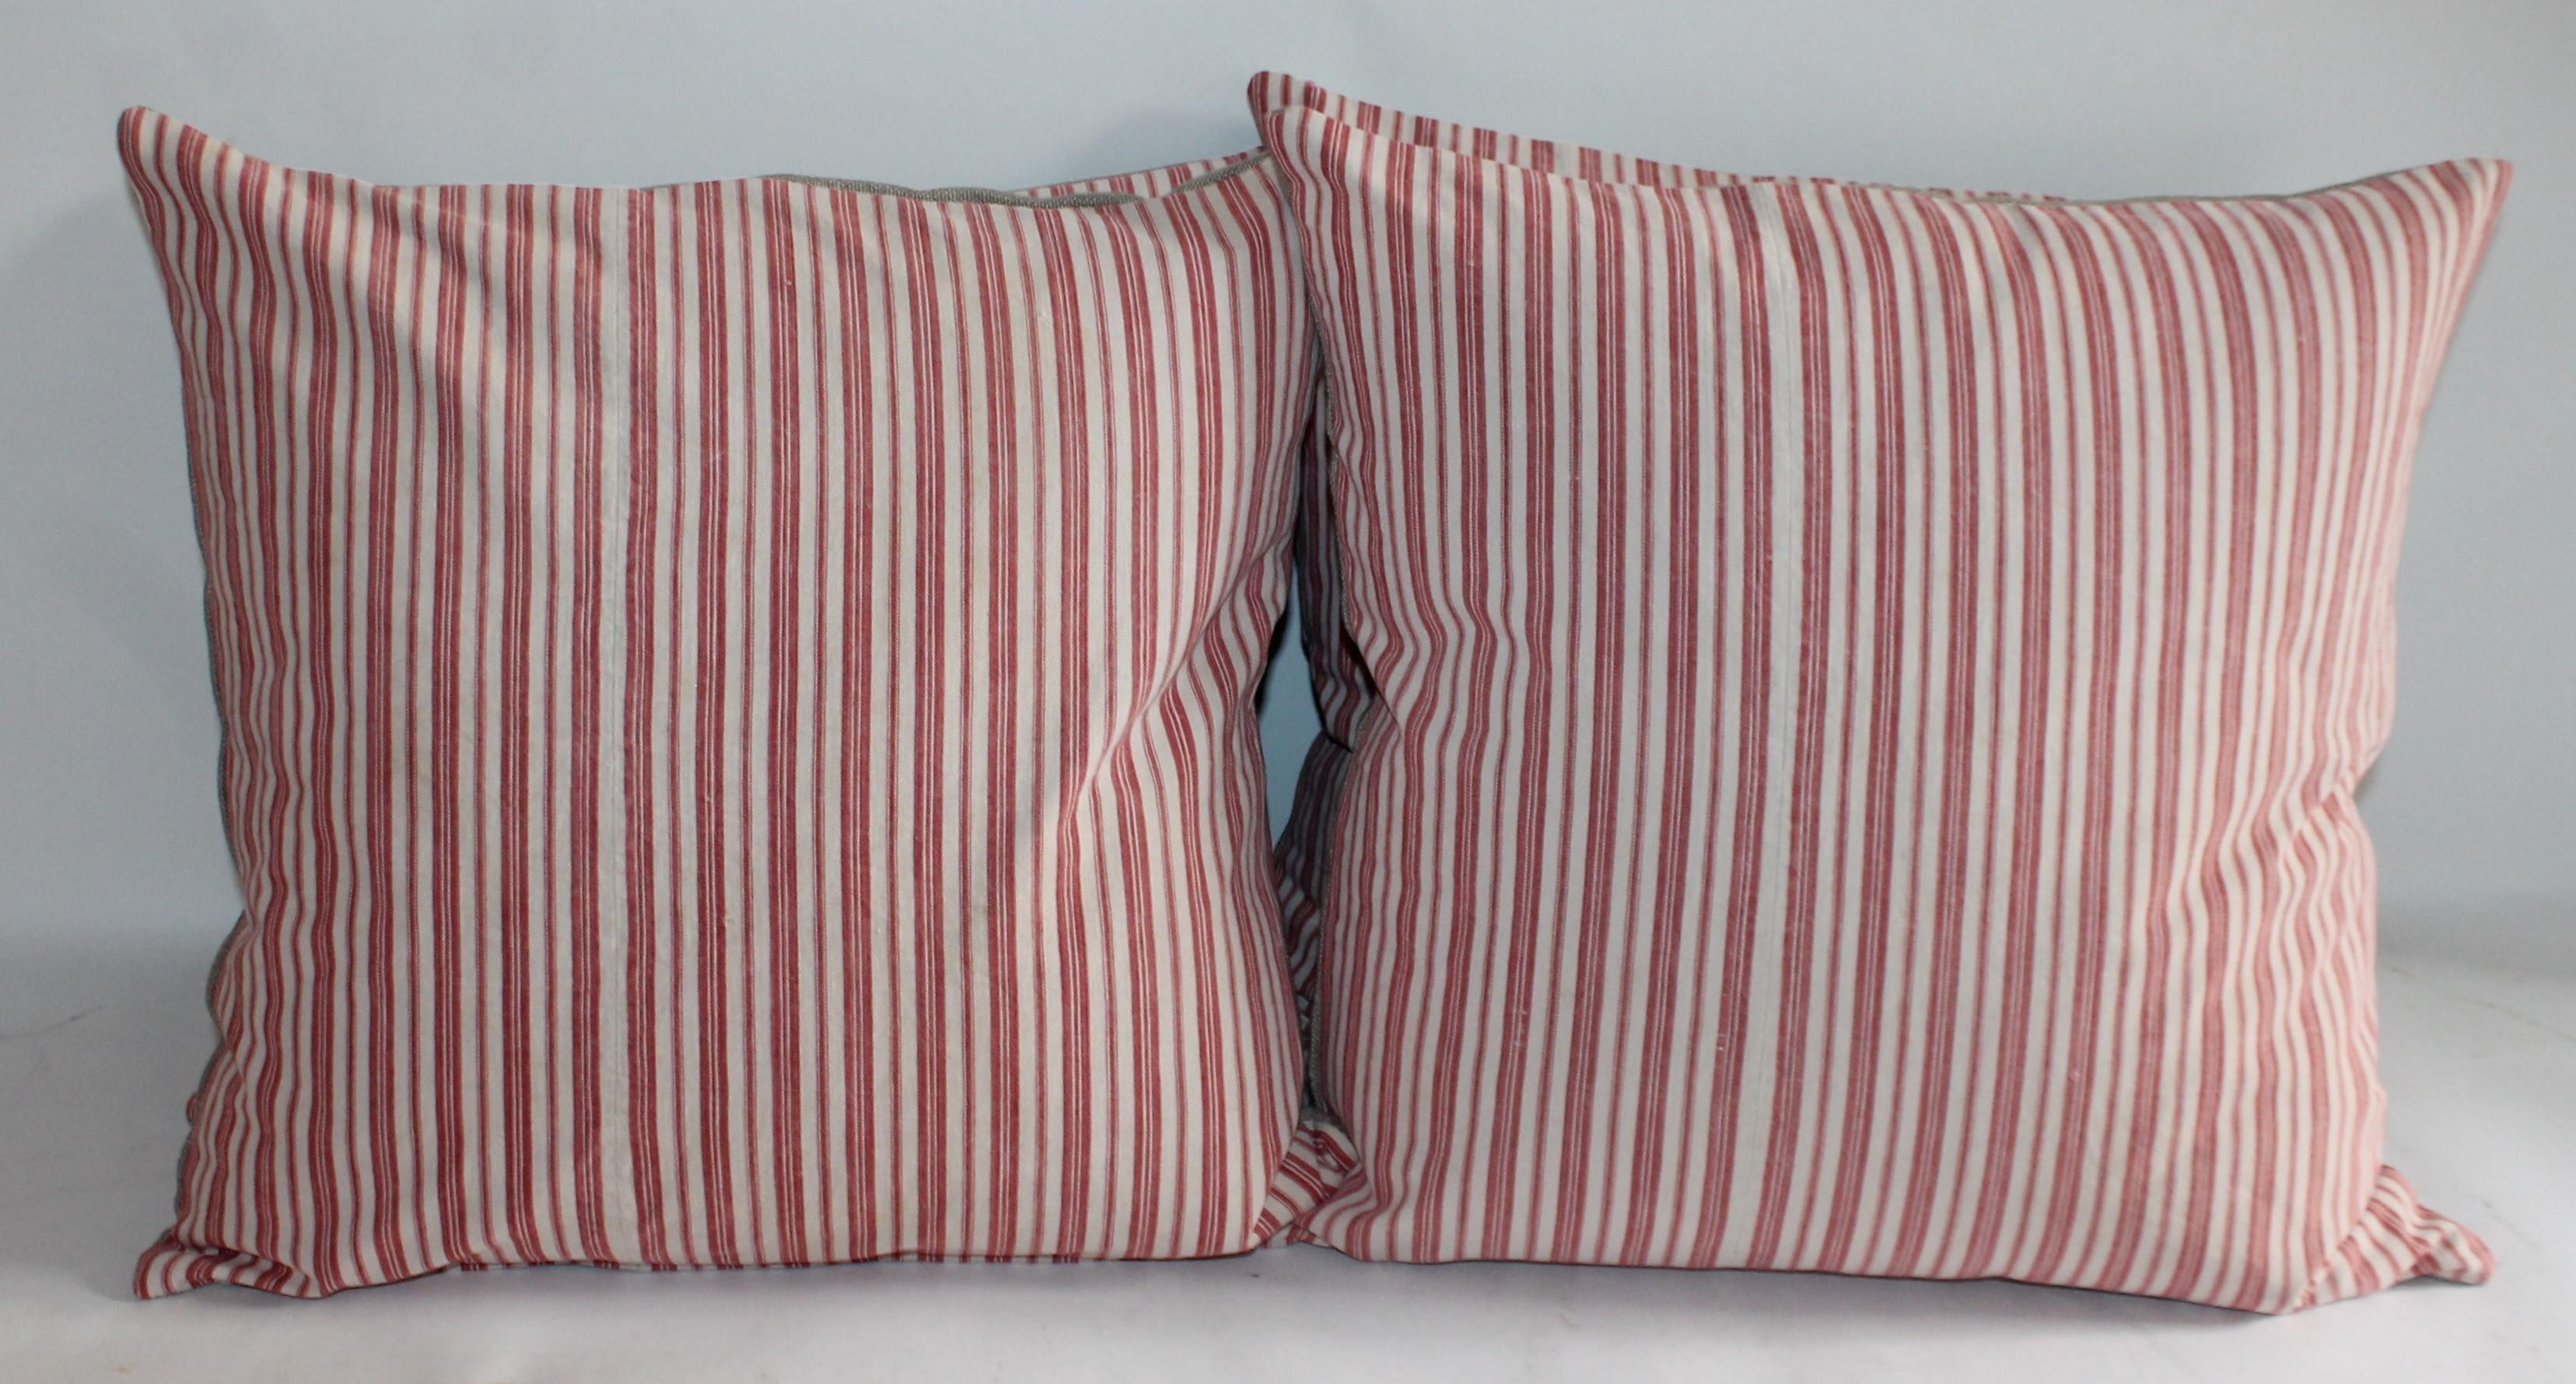 Adirondack Four 19th Century Red and White Stripe Ticking Pillows, Collection of Four For Sale